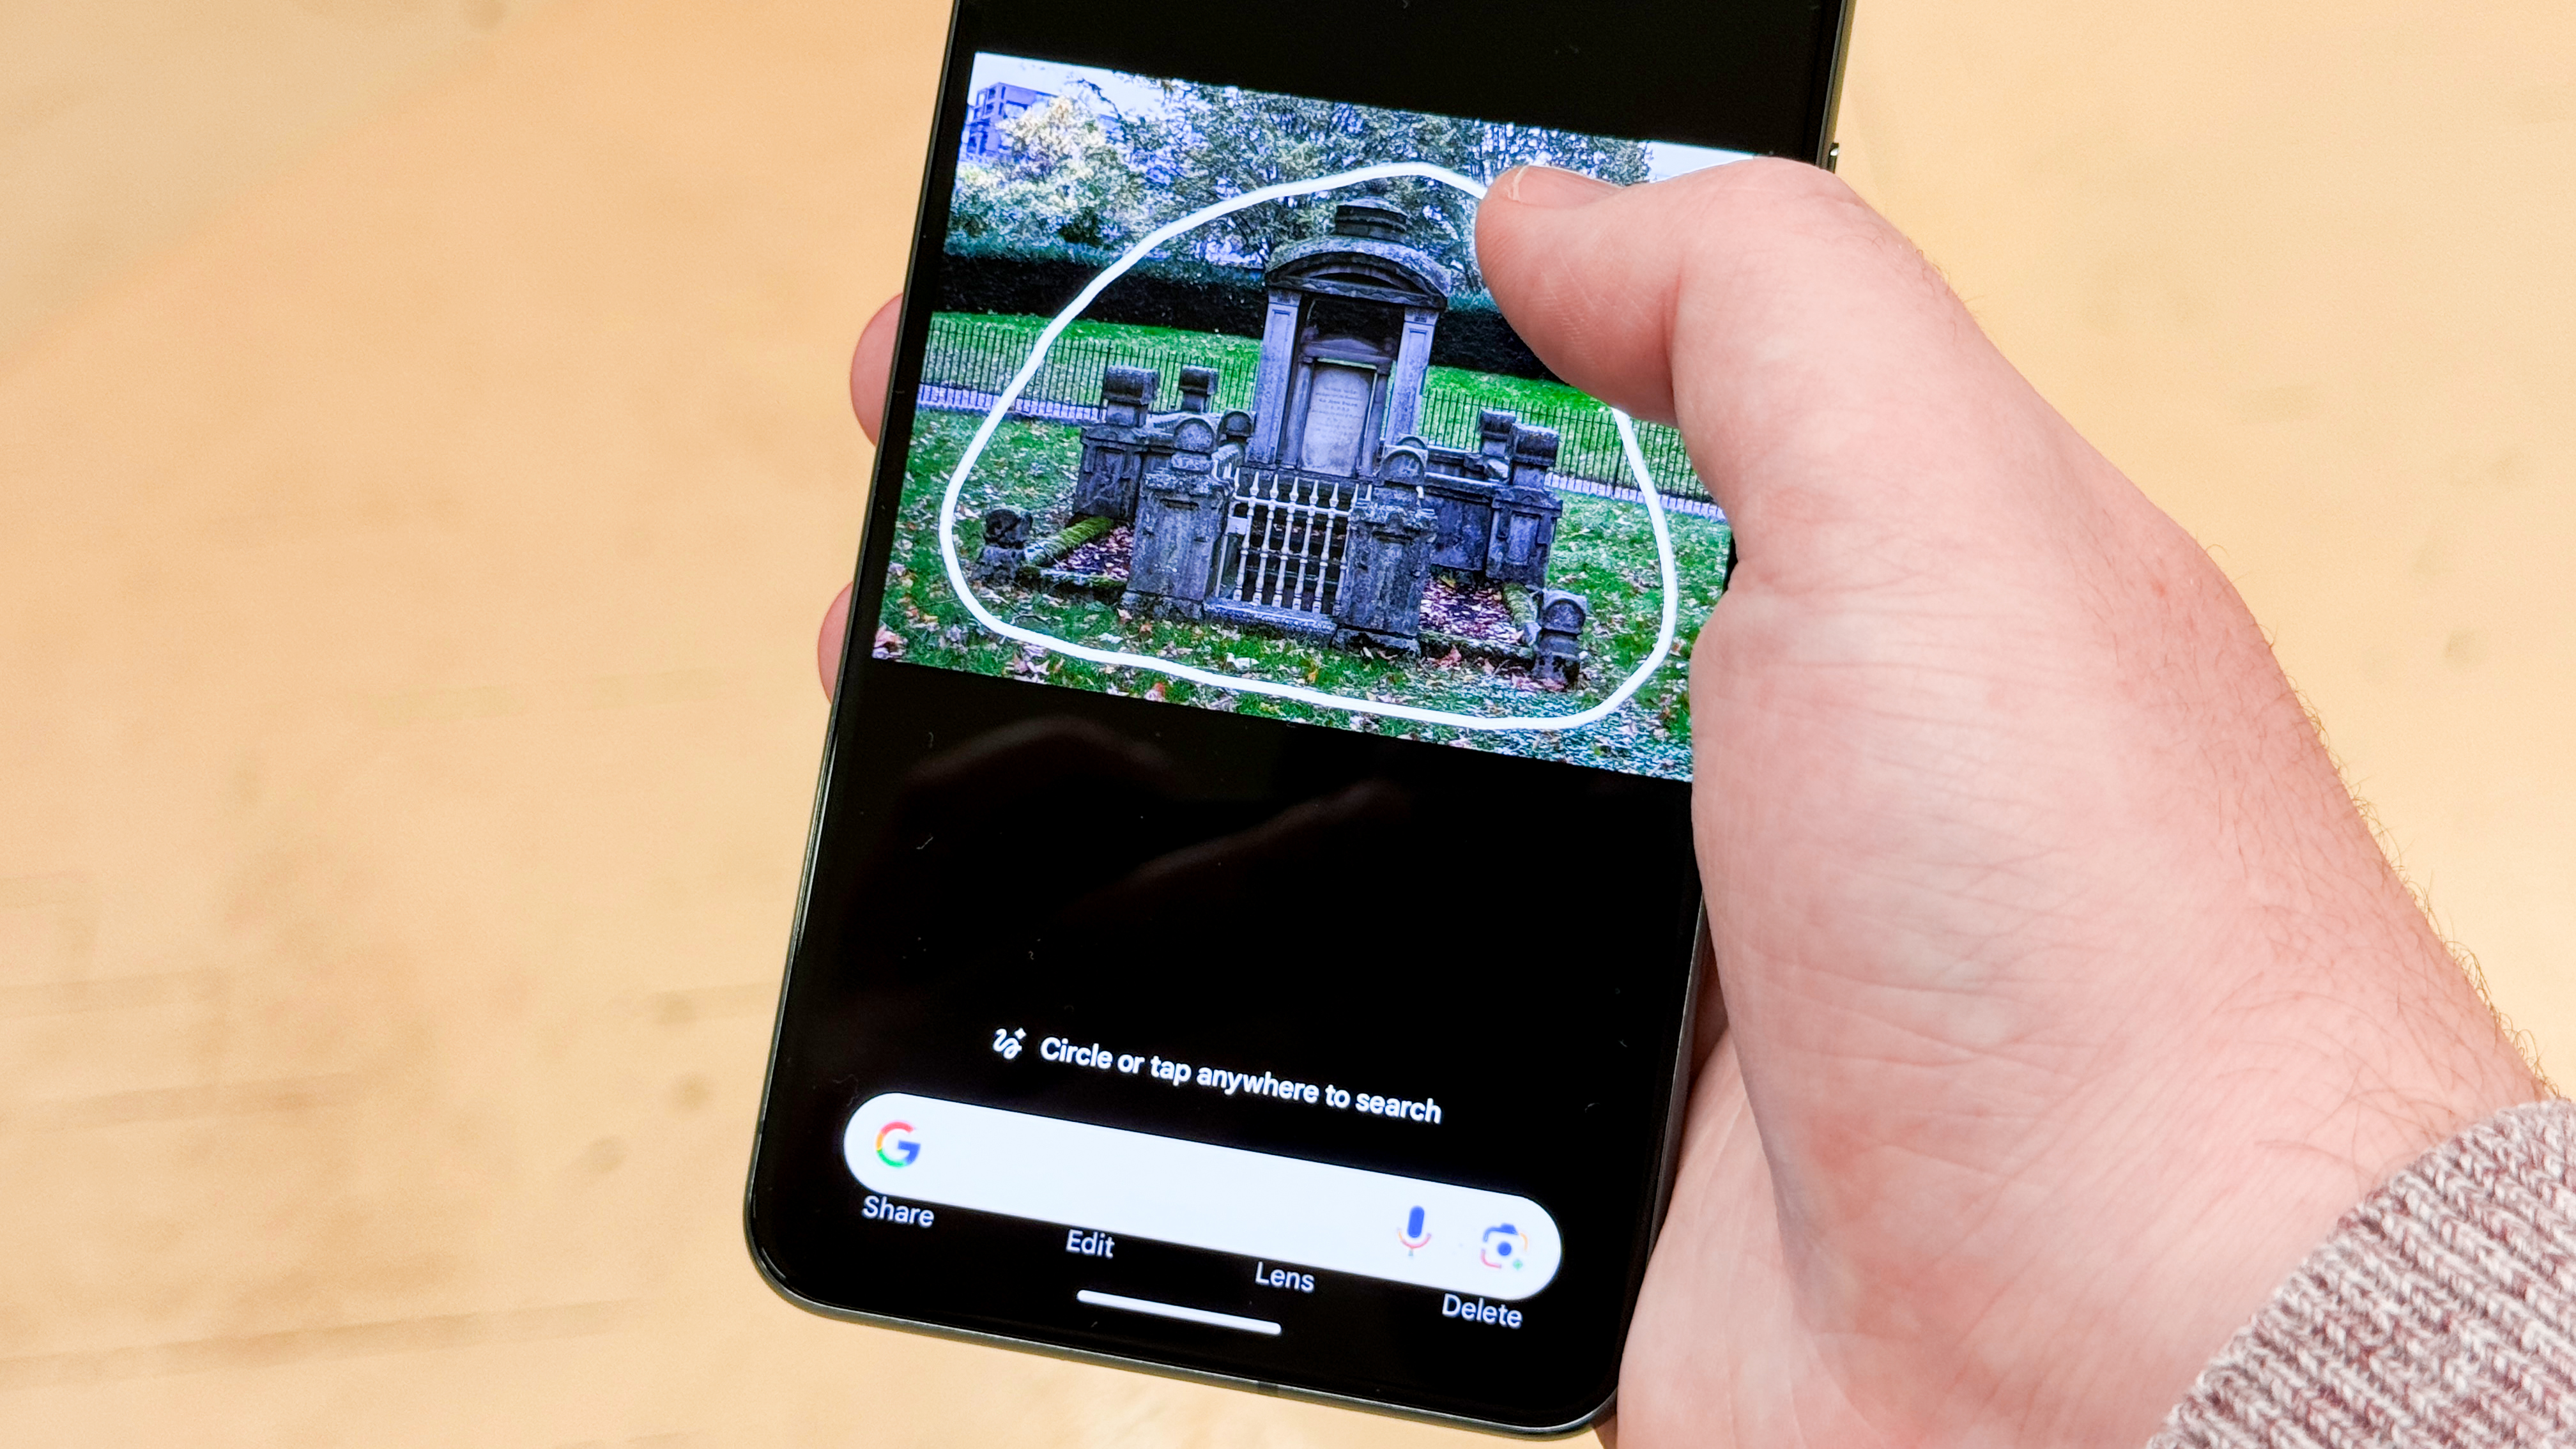 An image of a Pixel being held in a person's hand with the Circle to Search feature being used on the screen to search for a mausoleum.